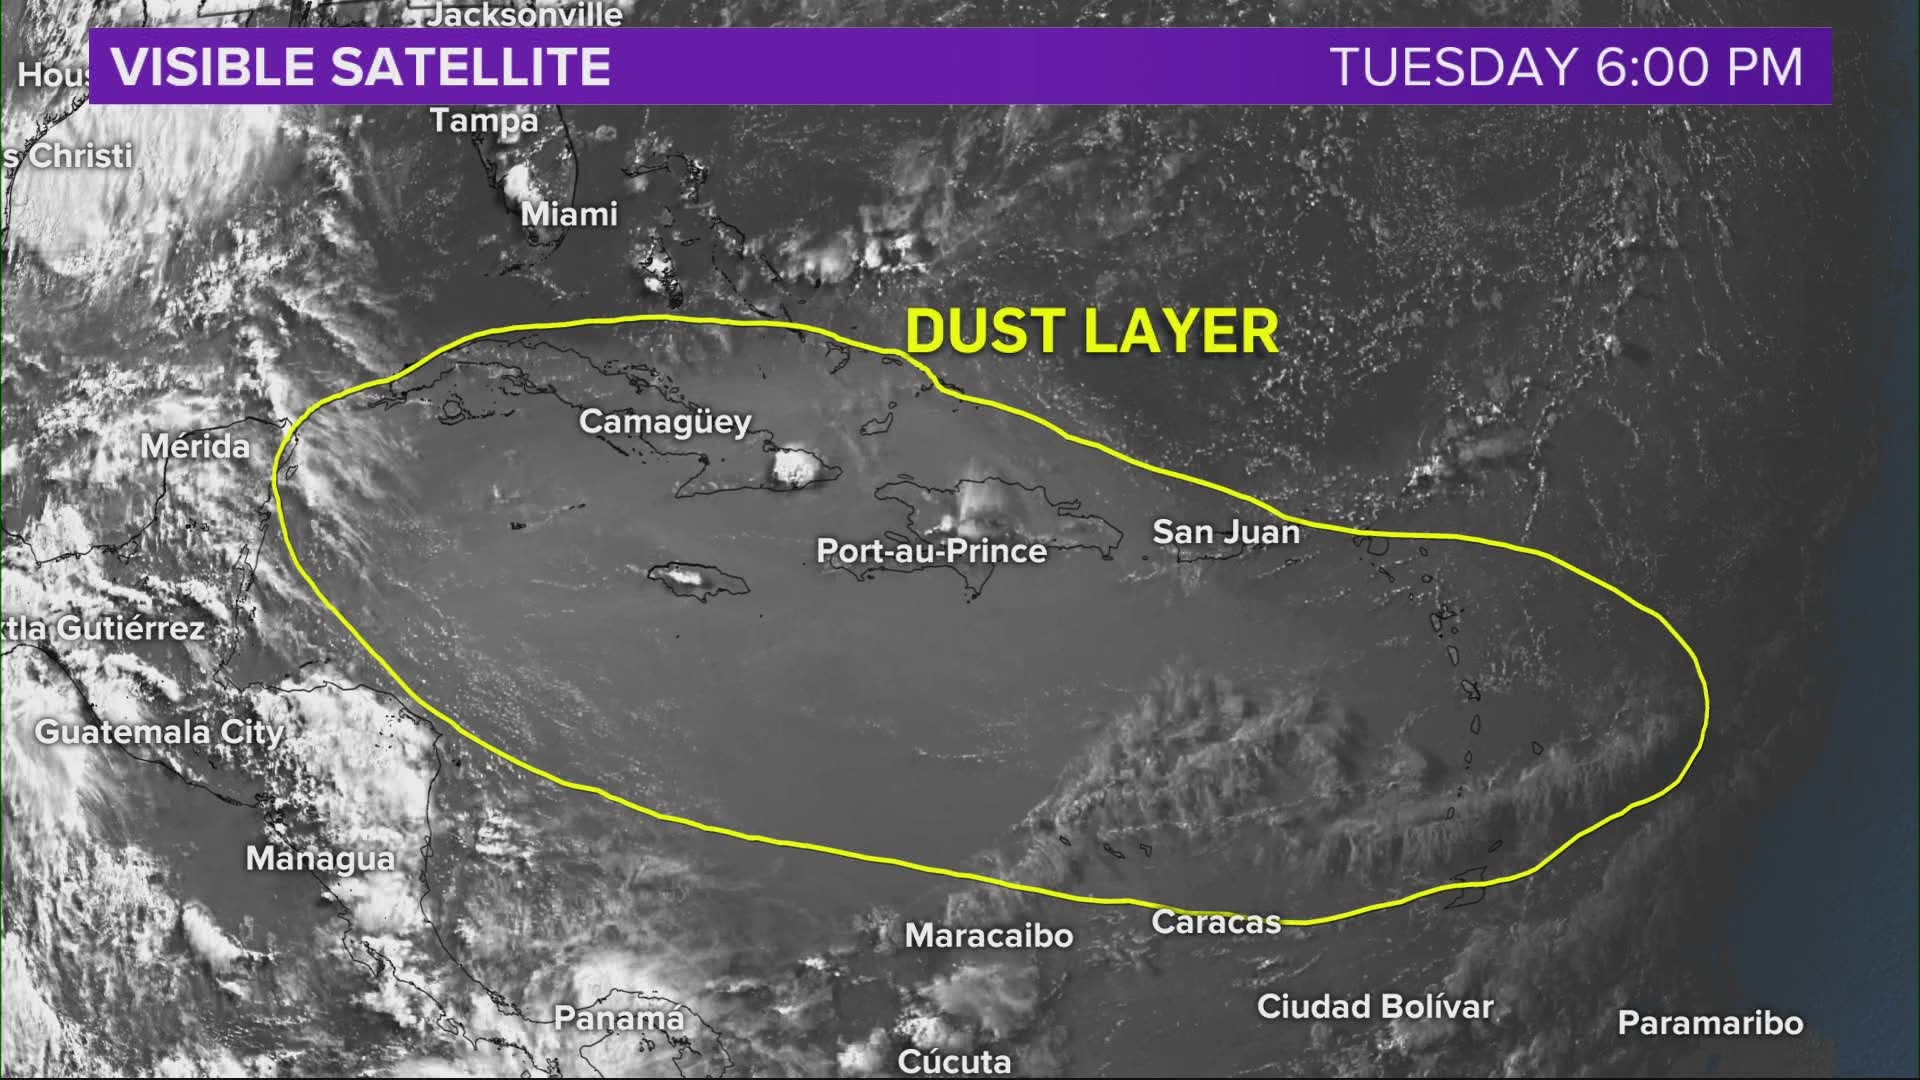 We're expecting a cloud of dust from the Sahara Desert to impact central Indiana later this week.